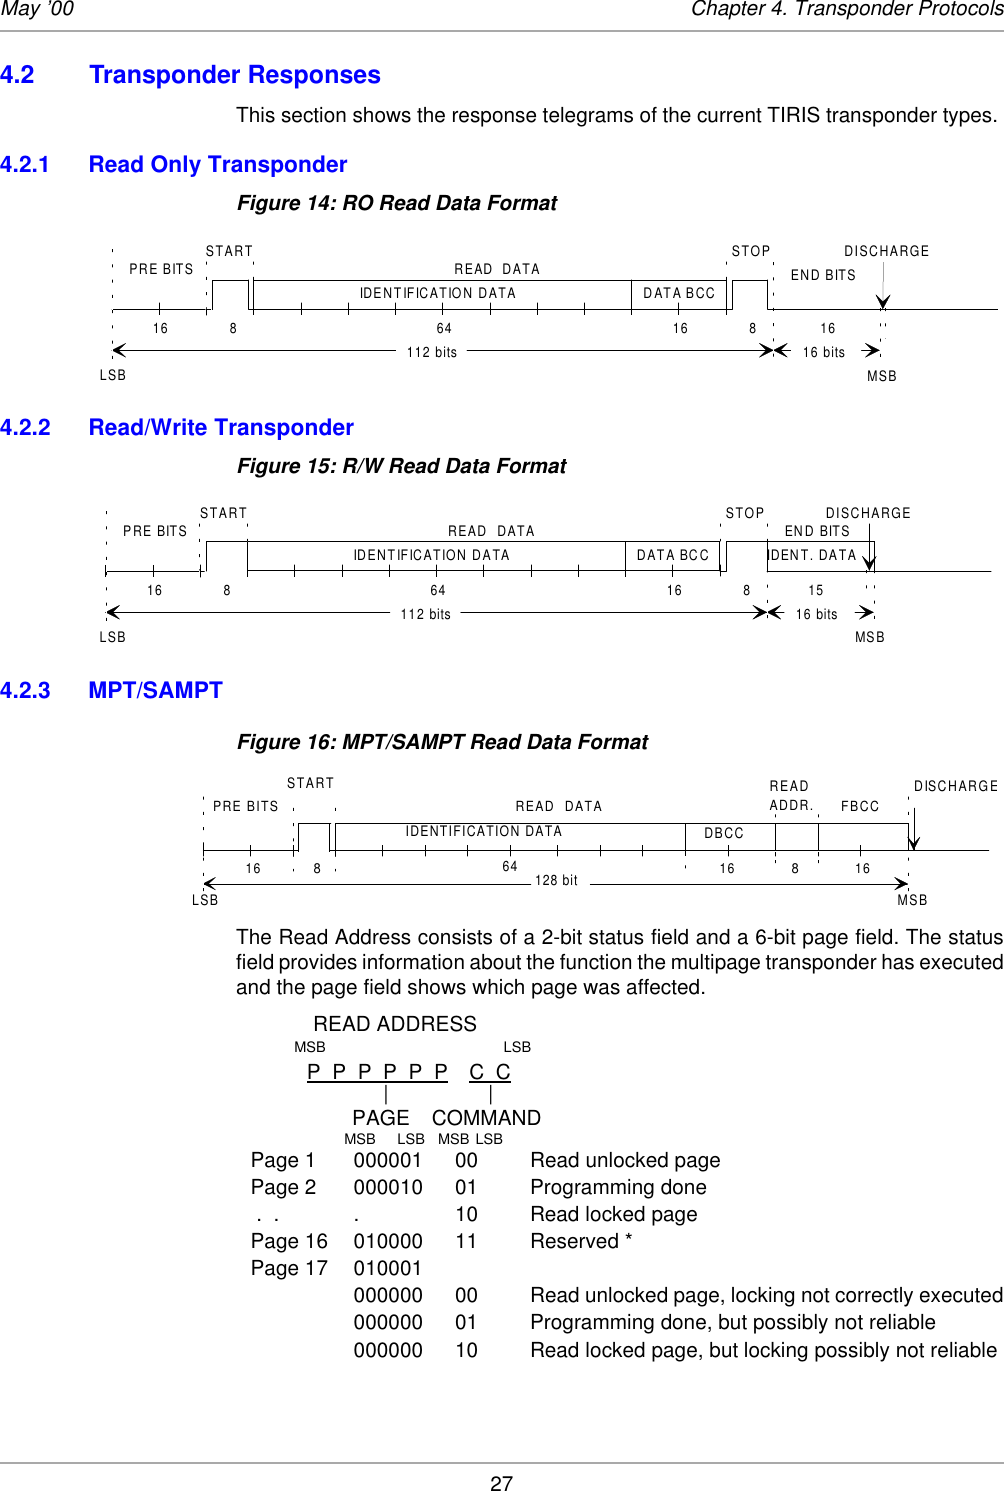 27May ’00 Chapter 4. Transponder Protocols4.2 Transponder ResponsesThis section shows the response telegrams of the current TIRIS transponder types. 4.2.1 Read Only TransponderFigure 14: RO Read Data Format4.2.2 Read/Write TransponderFigure 15: R/W Read Data Format4.2.3 MPT/SAMPTFigure 16: MPT/SAMPT Read Data FormatThe Read Address consists of a 2-bit status field and a 6-bit page field. The statusfield provides information about the function the multipage transponder has executedand the page field shows which page was affected.READ ADDRESSMSB LSBP  P  P  P  P  P C  C||PAGE COMMANDMSB LSB MSB LSBPage 1  000001 00 Read unlocked pagePage 2  000010 01 Programming done   .  .    .     10 Read locked page   Page 16 010000 11 Reserved * Page 17 010001000000 00 Read unlocked page, locking not correctly executed000000 01 Programming done, but possibly not reliable000000 10 Read locked page, but locking possibly not reliableSTART816 8STOP64 16DISCHARGELSBPRE BITS END BITSIDENTIFICATION DATA DATA BCCMSB16 bits16112 bitsREAD  DATASTART816 8READ  DATASTOP64 16DISCHARGE15LSBPRE BITS END BITSIDENTIFICATION DATA DATA BCCMSB112 bits 16 bitsIDENT. DATASTART816816READ  DATA ADDR.READ128 bit6416LSBIDENTIFICATION DATAMSBFBCC DBCCPRE BITSDISCHARGE